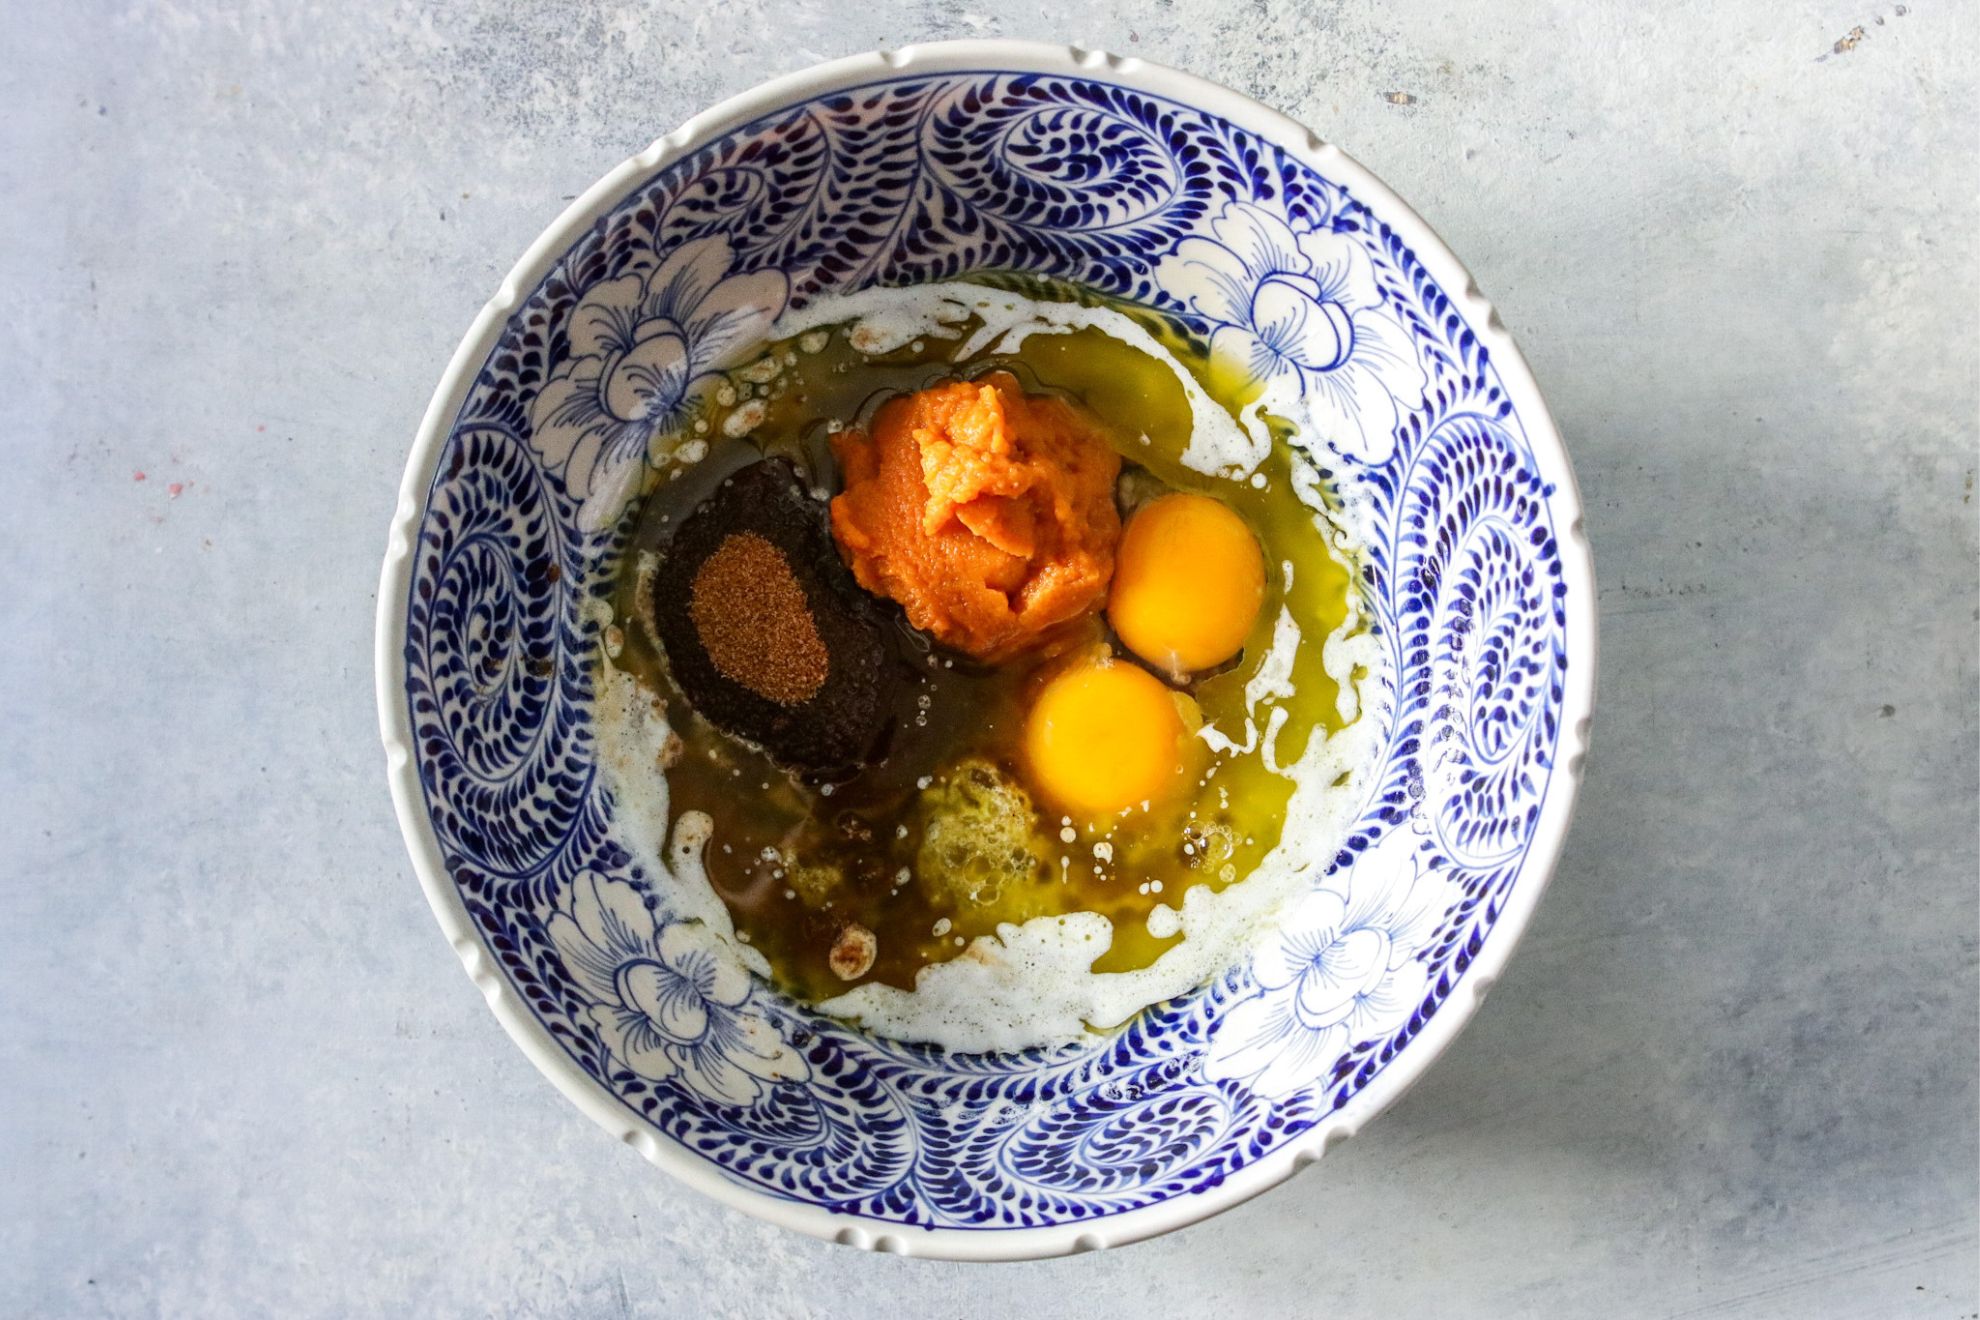 This is an overhead vertical image of a white and blue patterned bowl on a light grey surface. In the bowl are butter, eggs, pumpkin puree and coconut sugar.